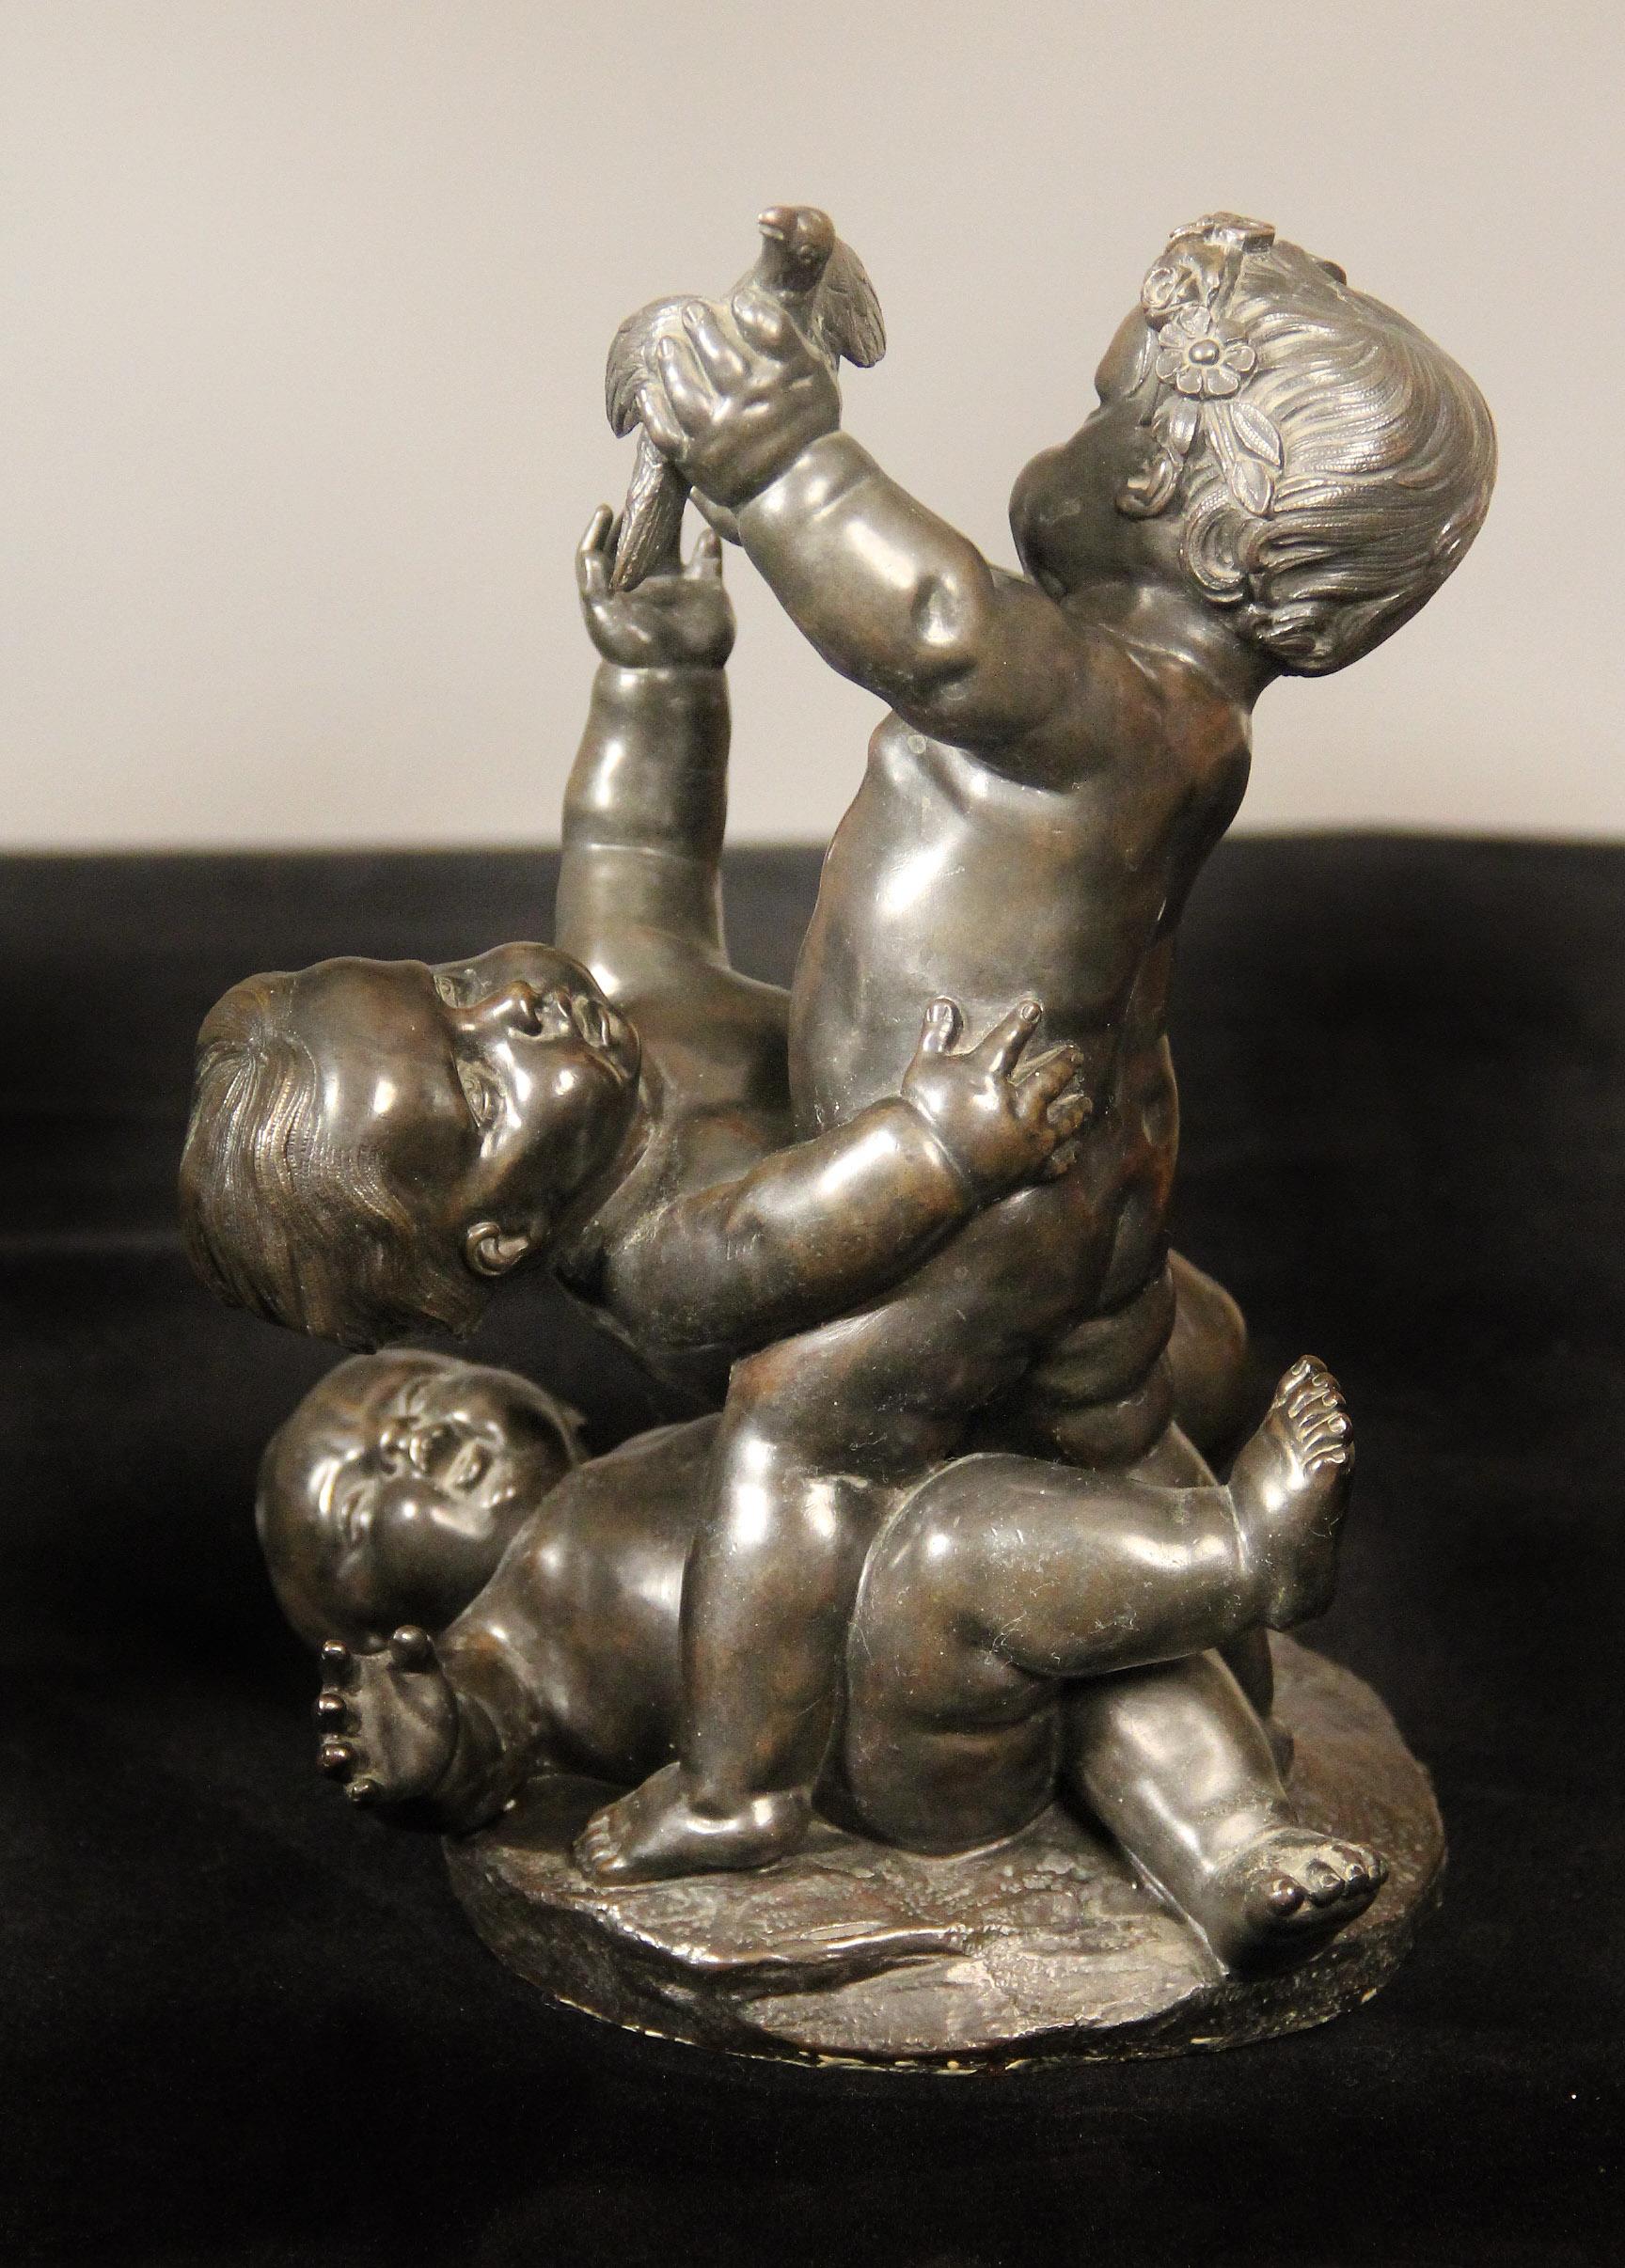 A lovely pair of late 19th century bronzes of putti at play

Each bronze depicting three putti wrestling around, one with a bird, the other with a conch.